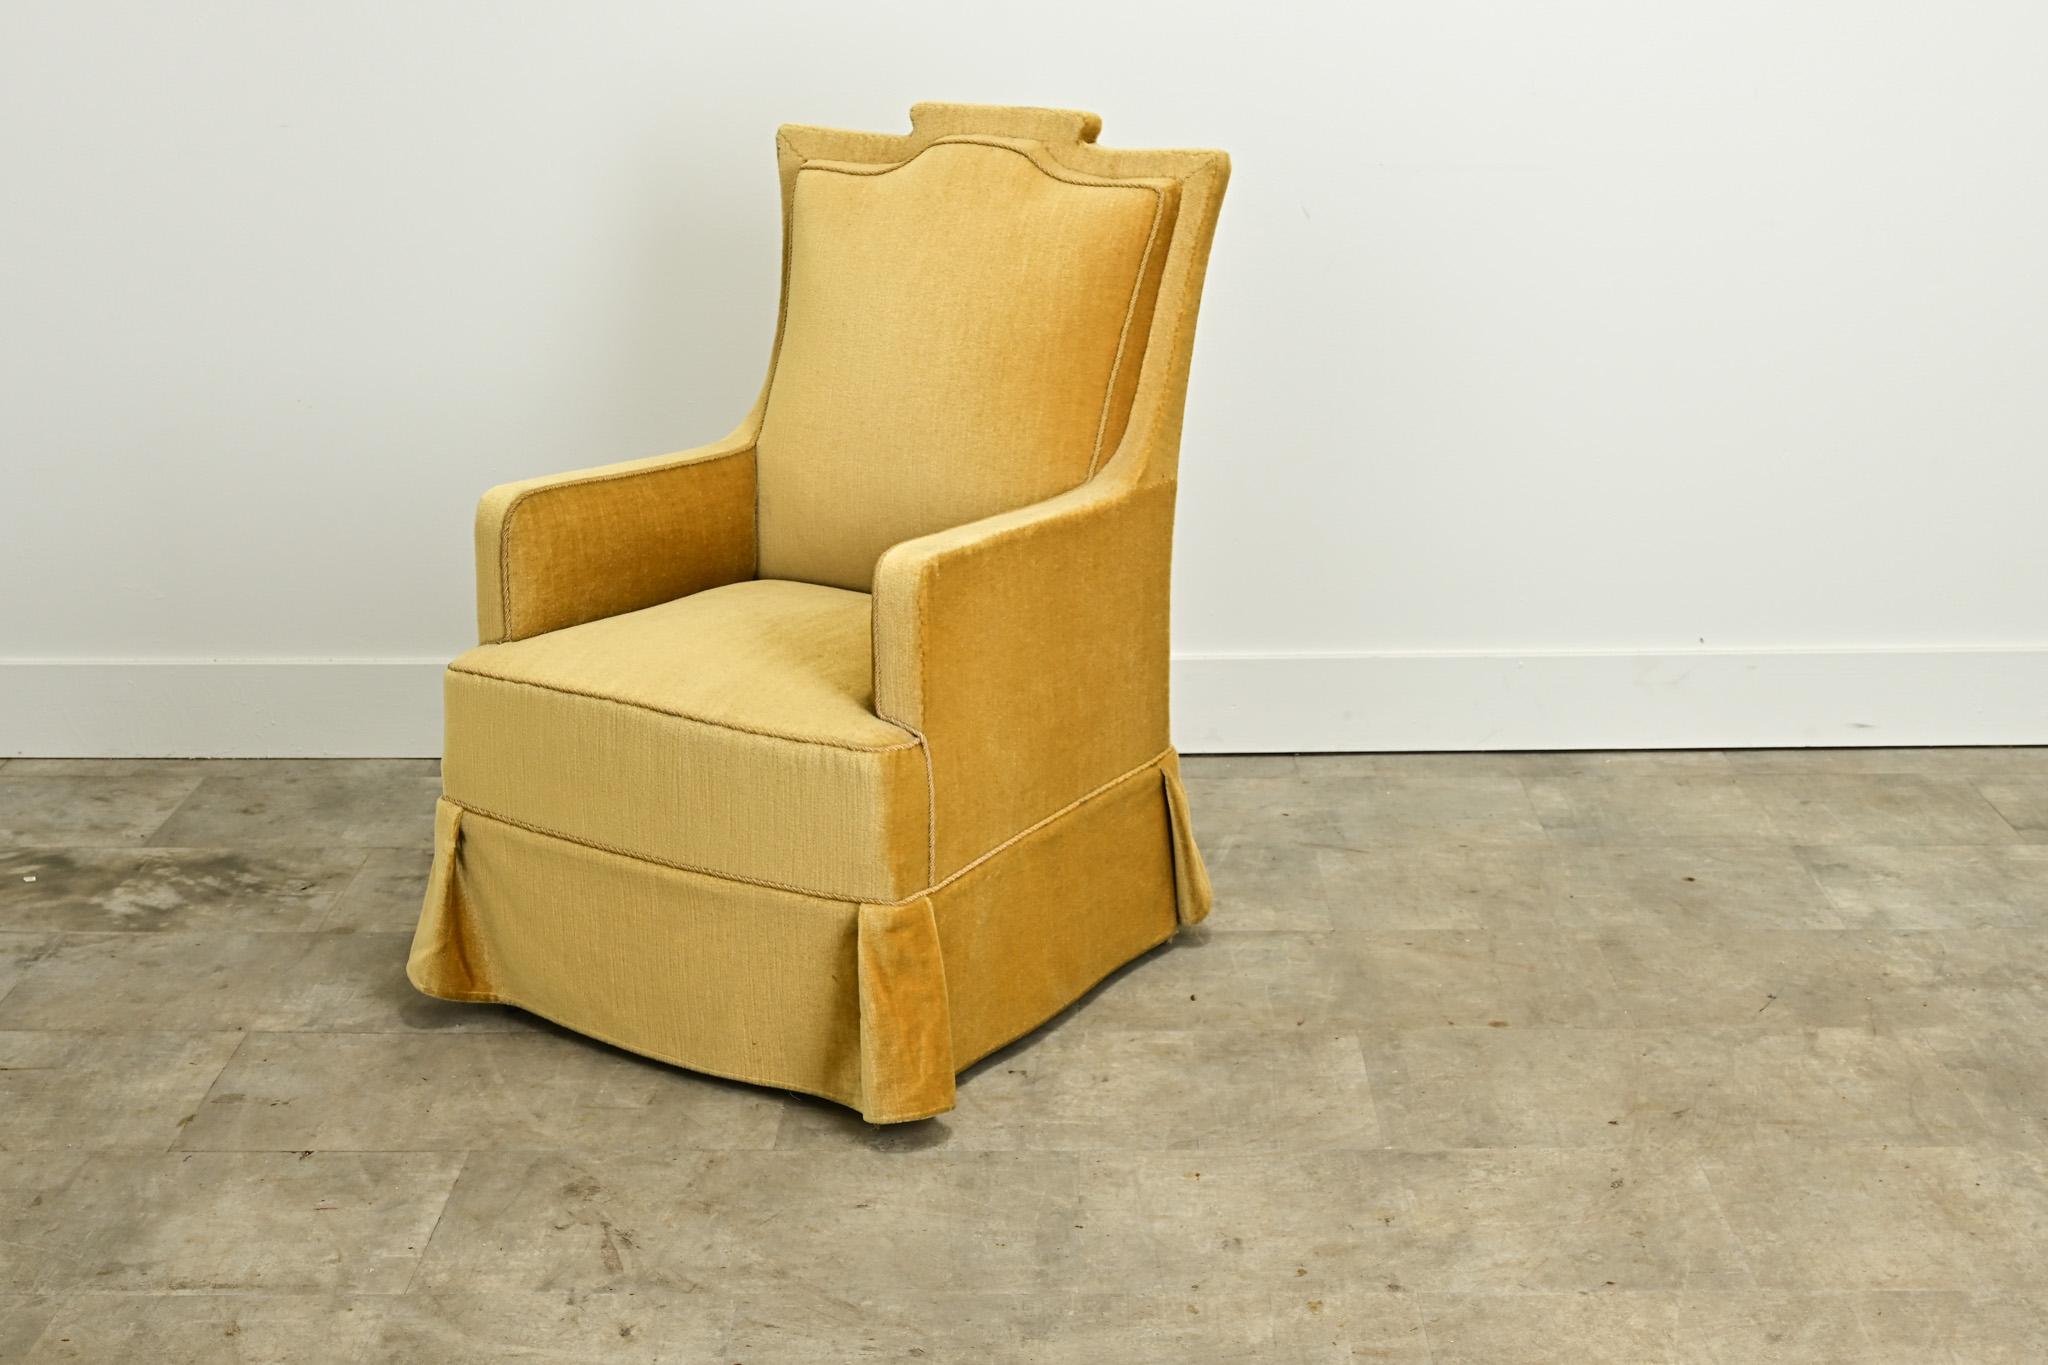 A comfortable vintage mohair armchair from the Netherlands. This armchair is upholstered and skirted in a mustard colored mohair fabric with a braided trim. Be sure to view the detailed images to see the current condition of this vintage armchair.